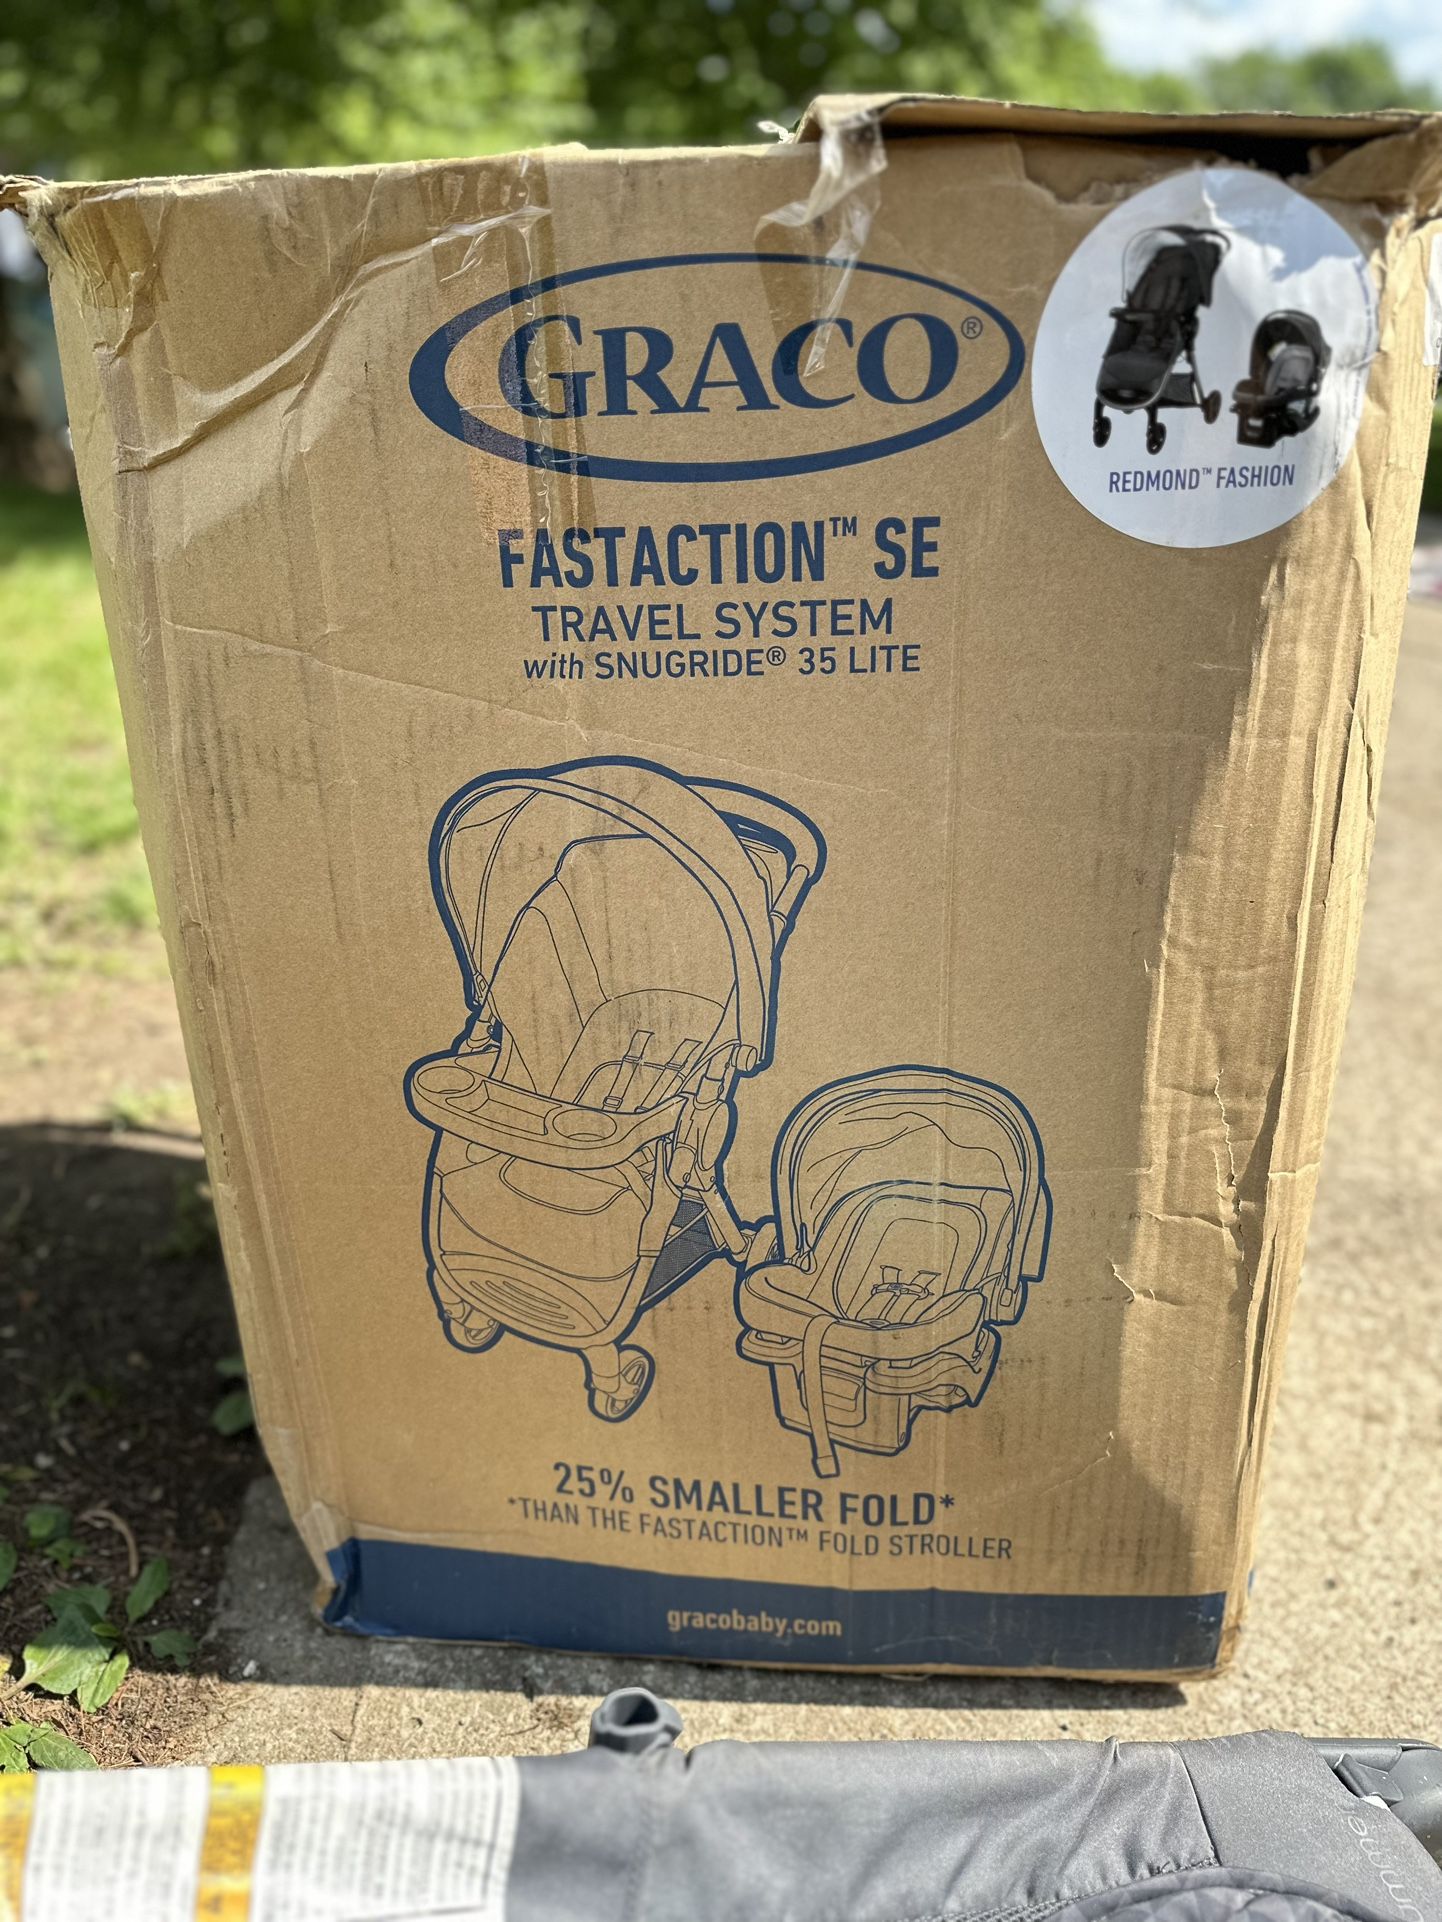 Graco Car seat And Stroller